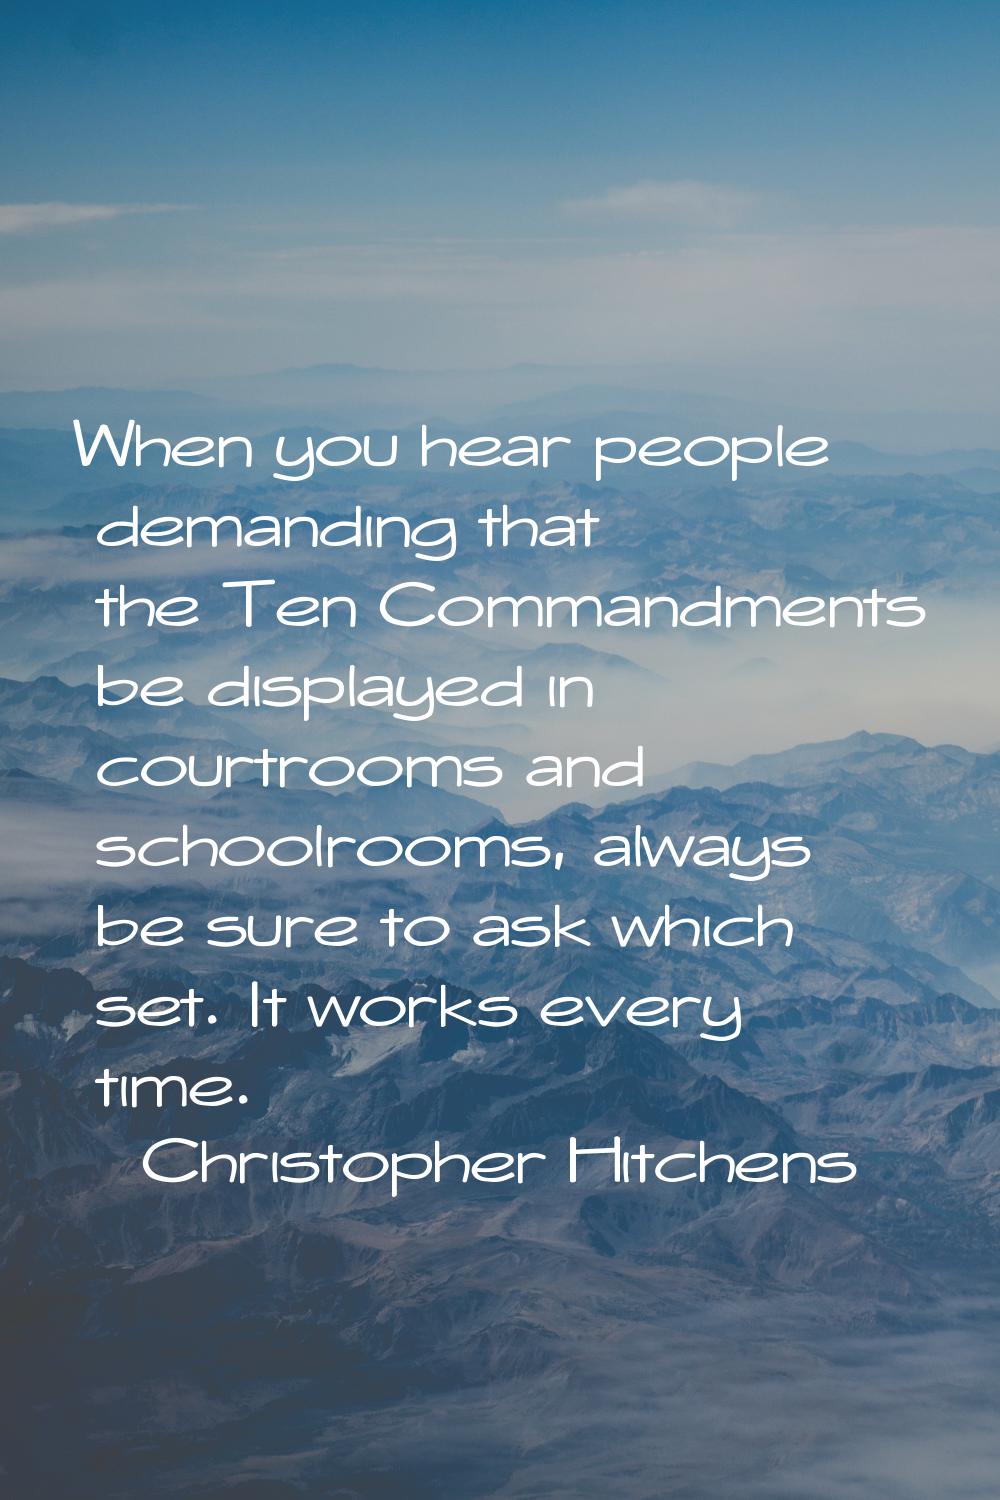 When you hear people demanding that the Ten Commandments be displayed in courtrooms and schoolrooms